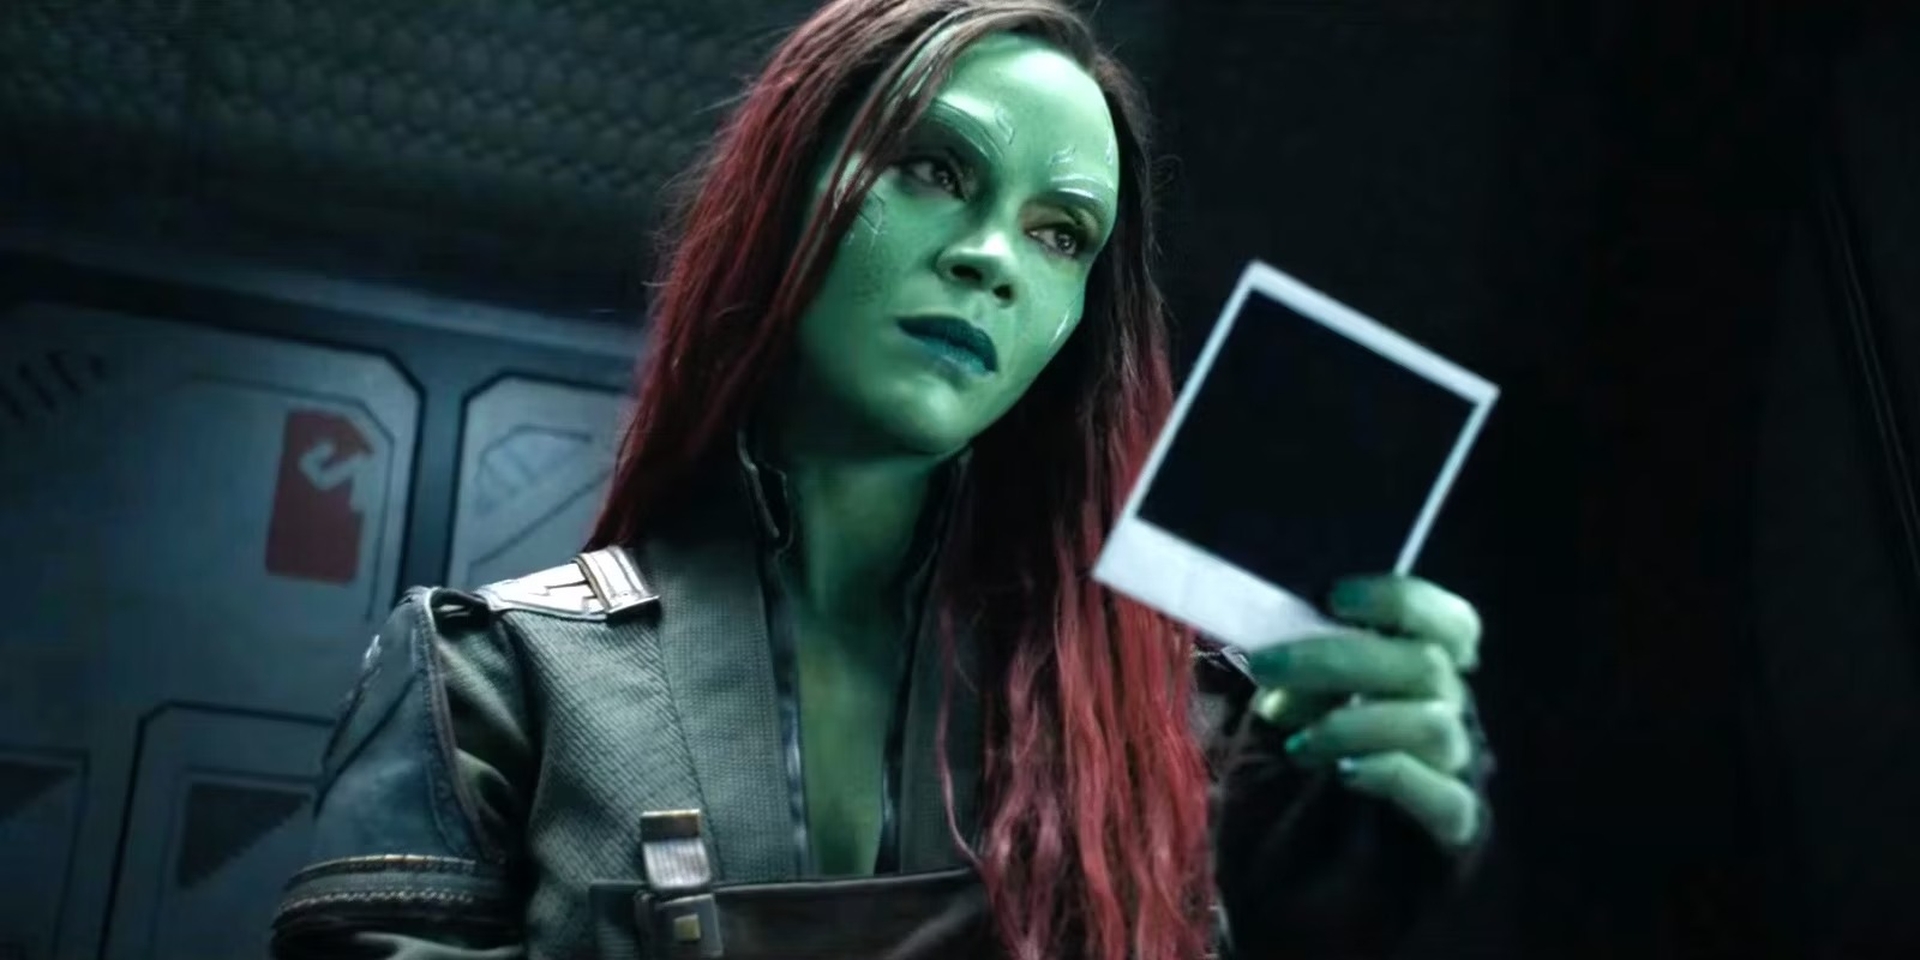 First trailer for the band of misfits of the MCU dropped, giving the fans the first look of the new Guardians of the Galaxy 3 villain, Chukwudi Iwuji's...